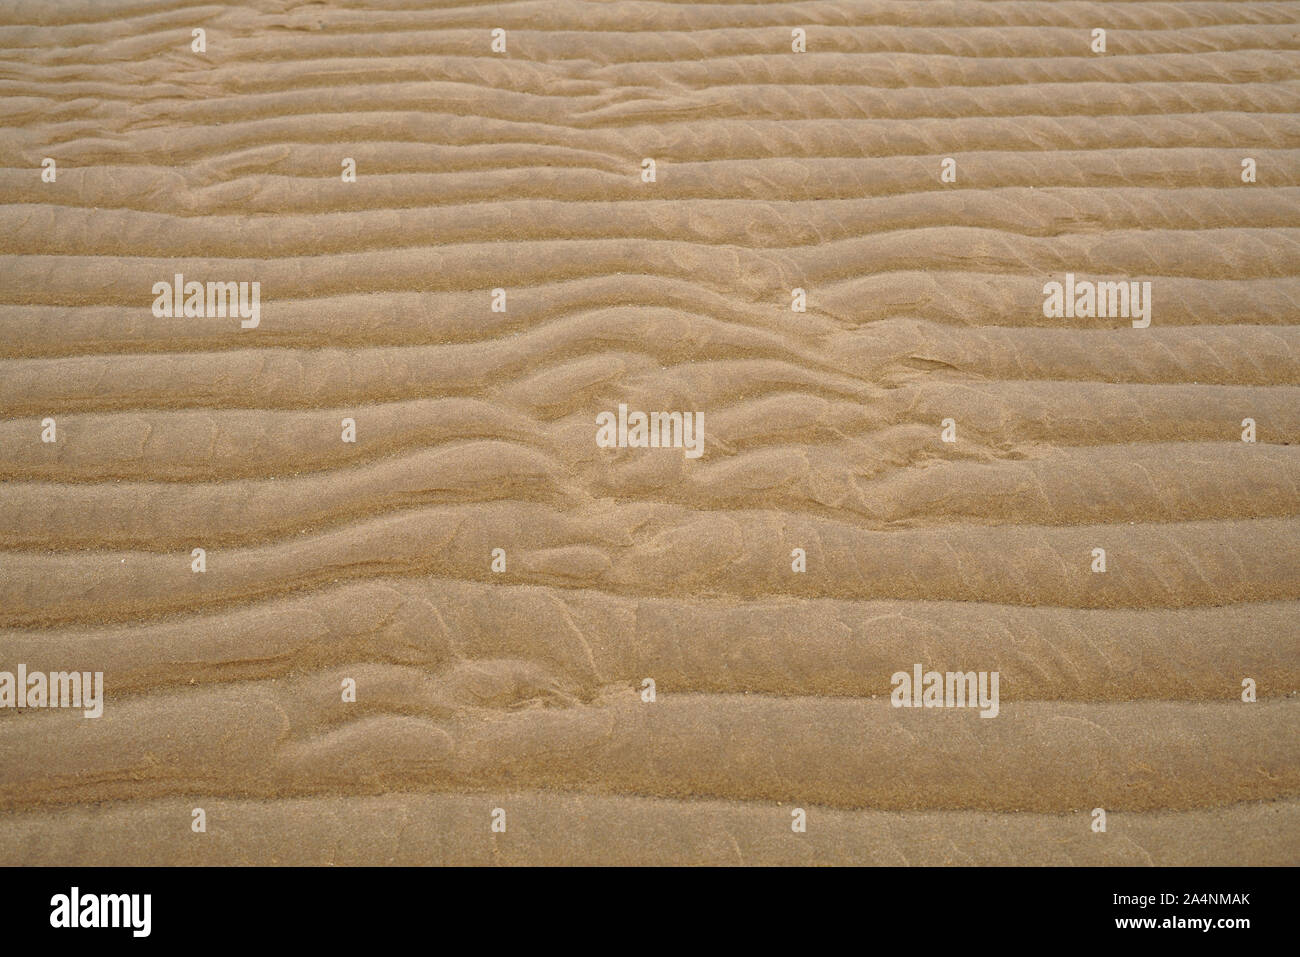 Tidal mudflats of the Wadden Sea at low tide. Natural patterns are formed in the sand. UNESCO World Heritage, North Sea, Europe. Stock Photo